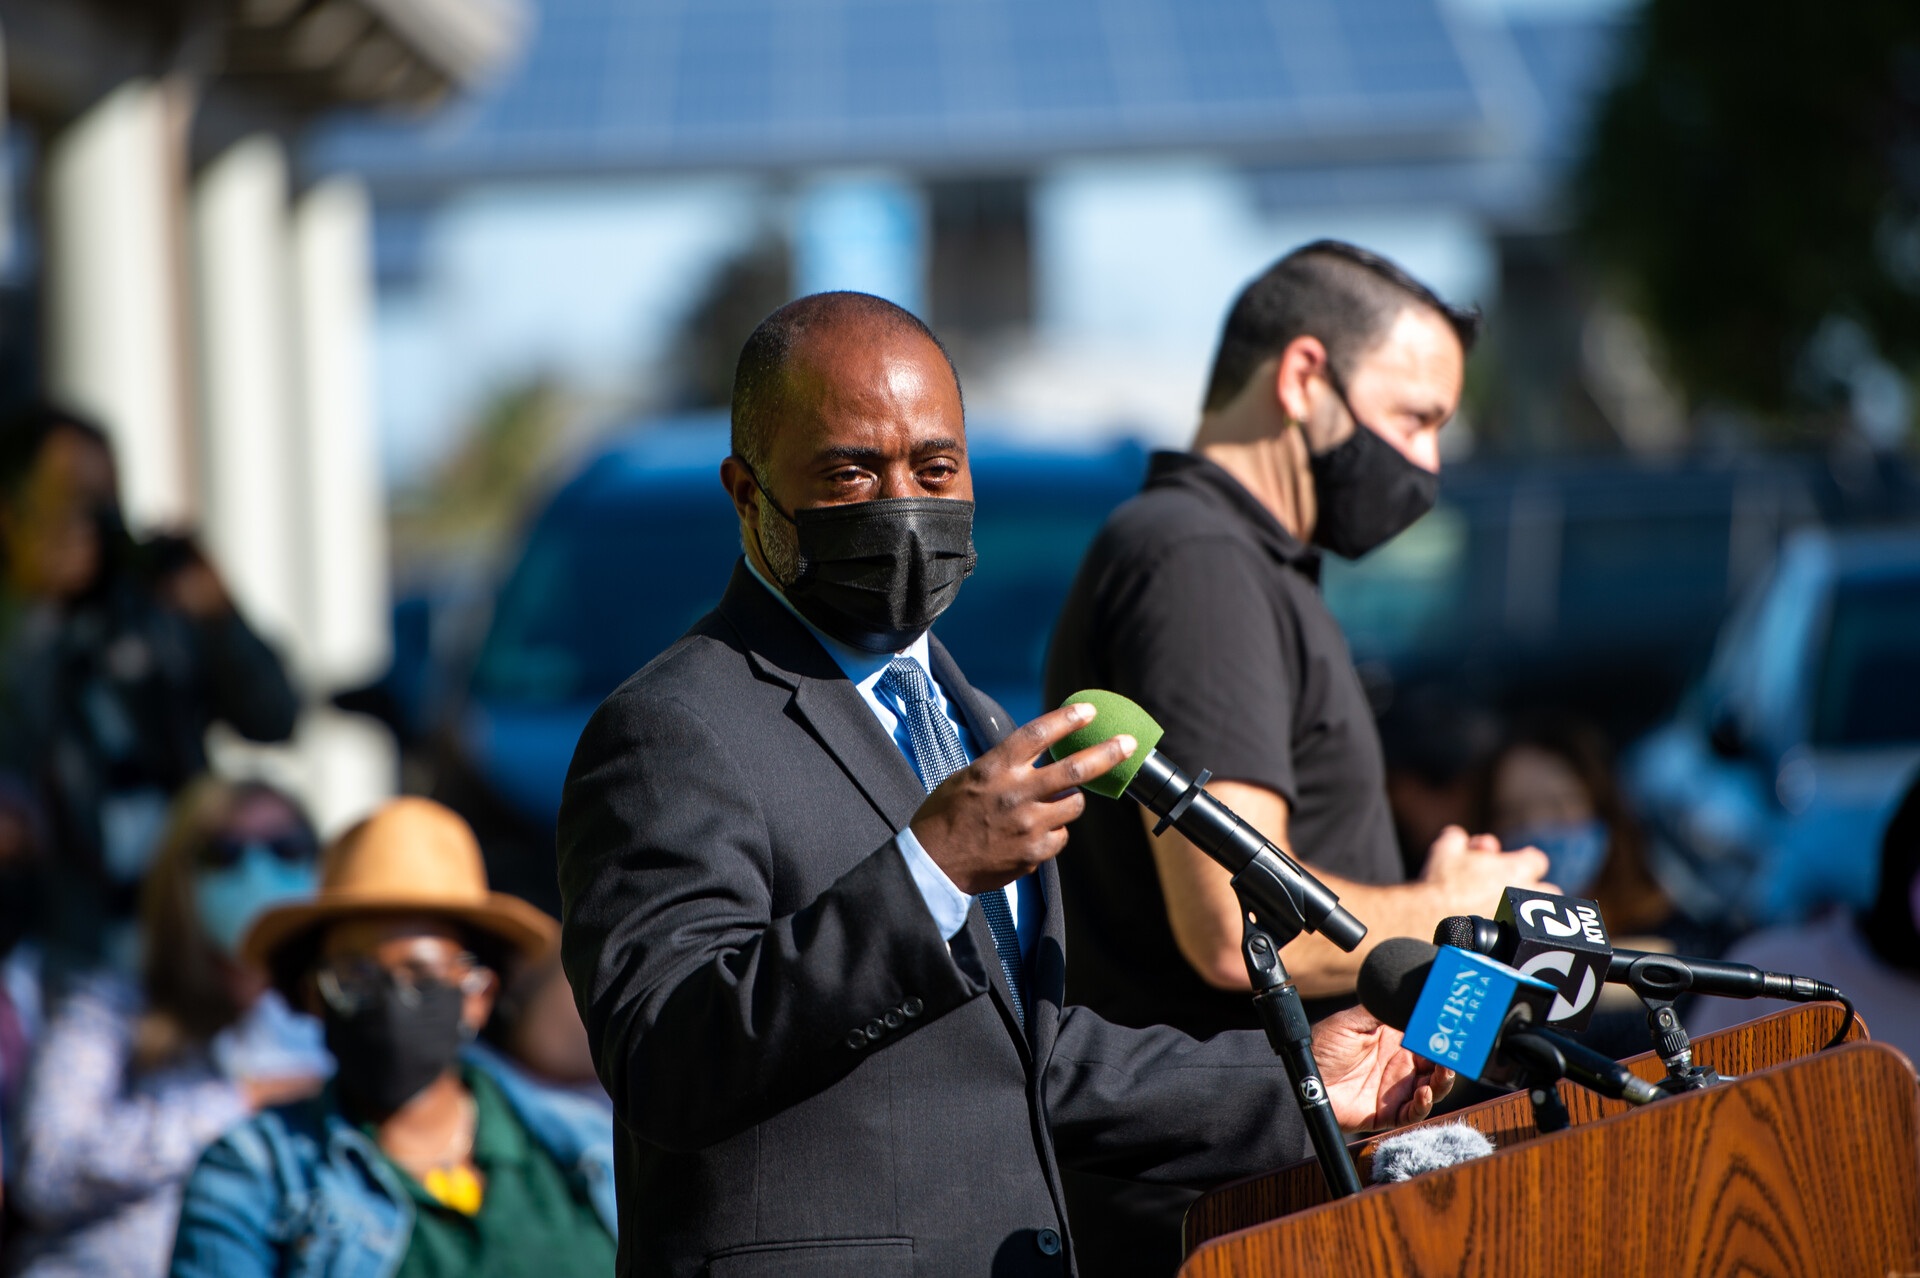 California Superintendent Tony Thurmond is pictured speaking from a wooden podium. He has a business suit and black face mask on. It's daytime.